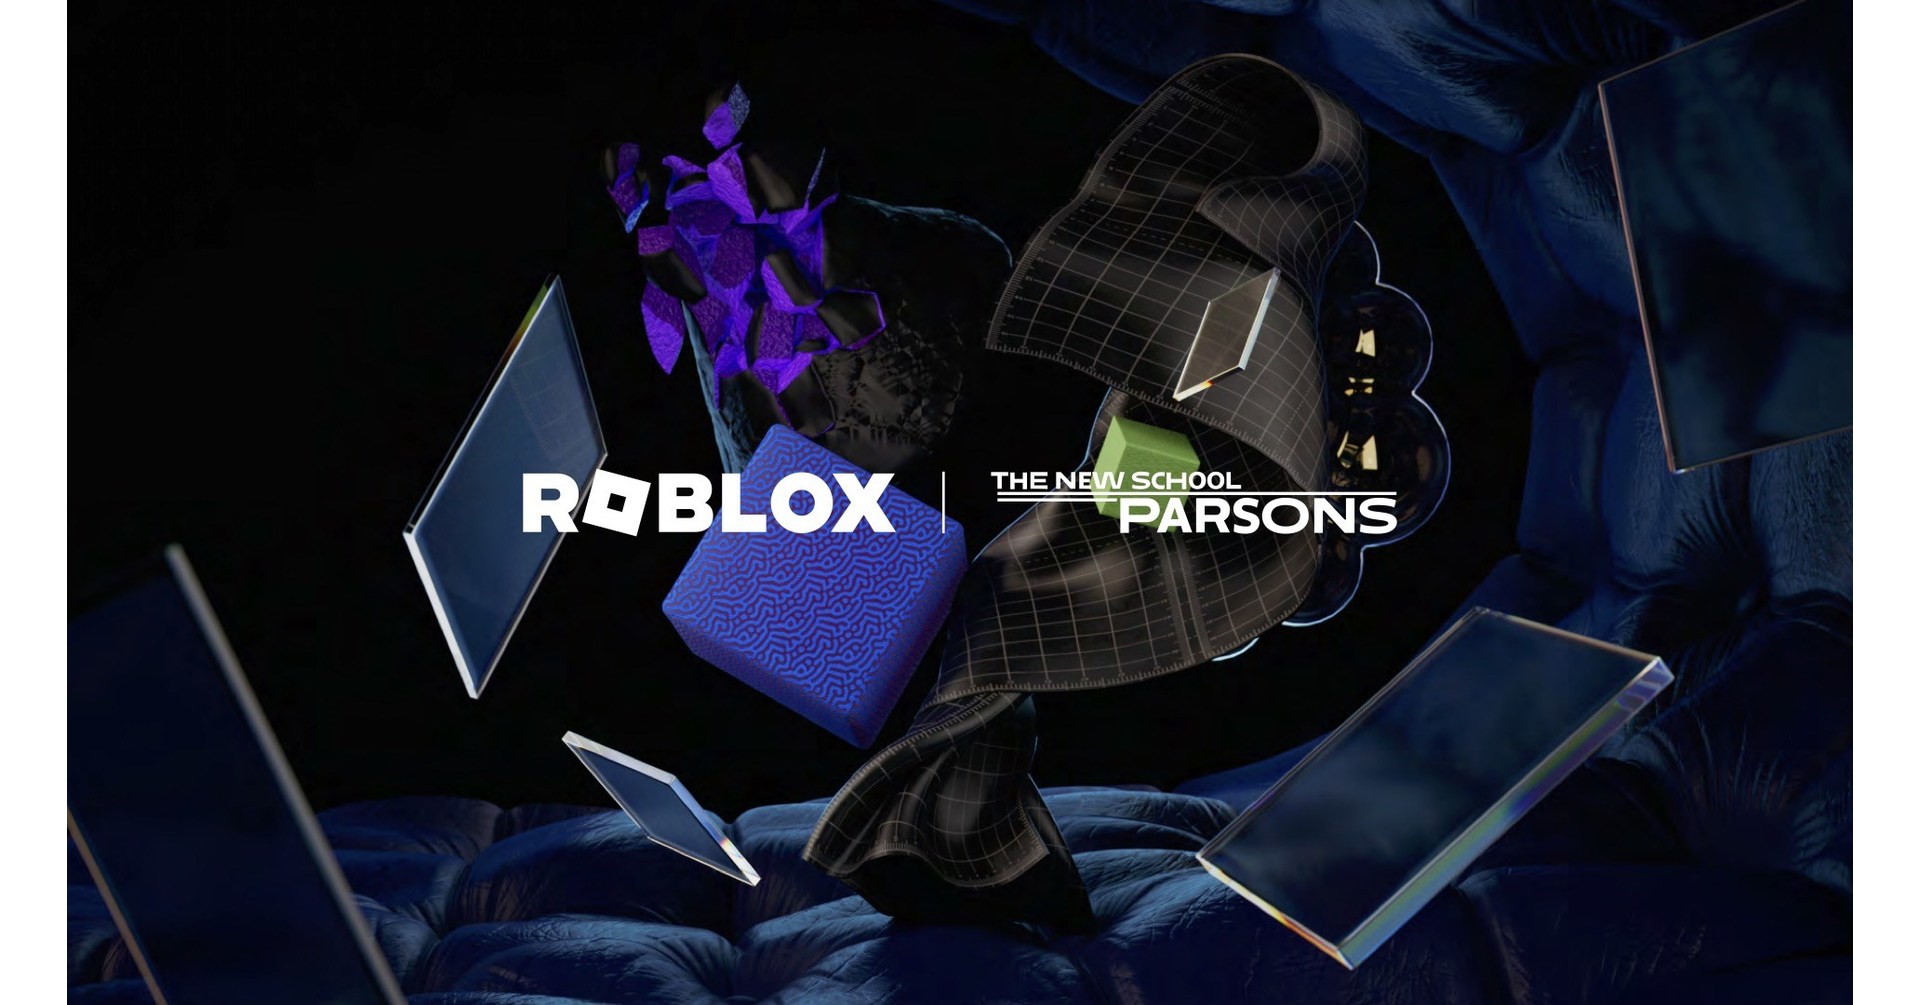 Bloxy News on X: Roblox has updated their name and branding